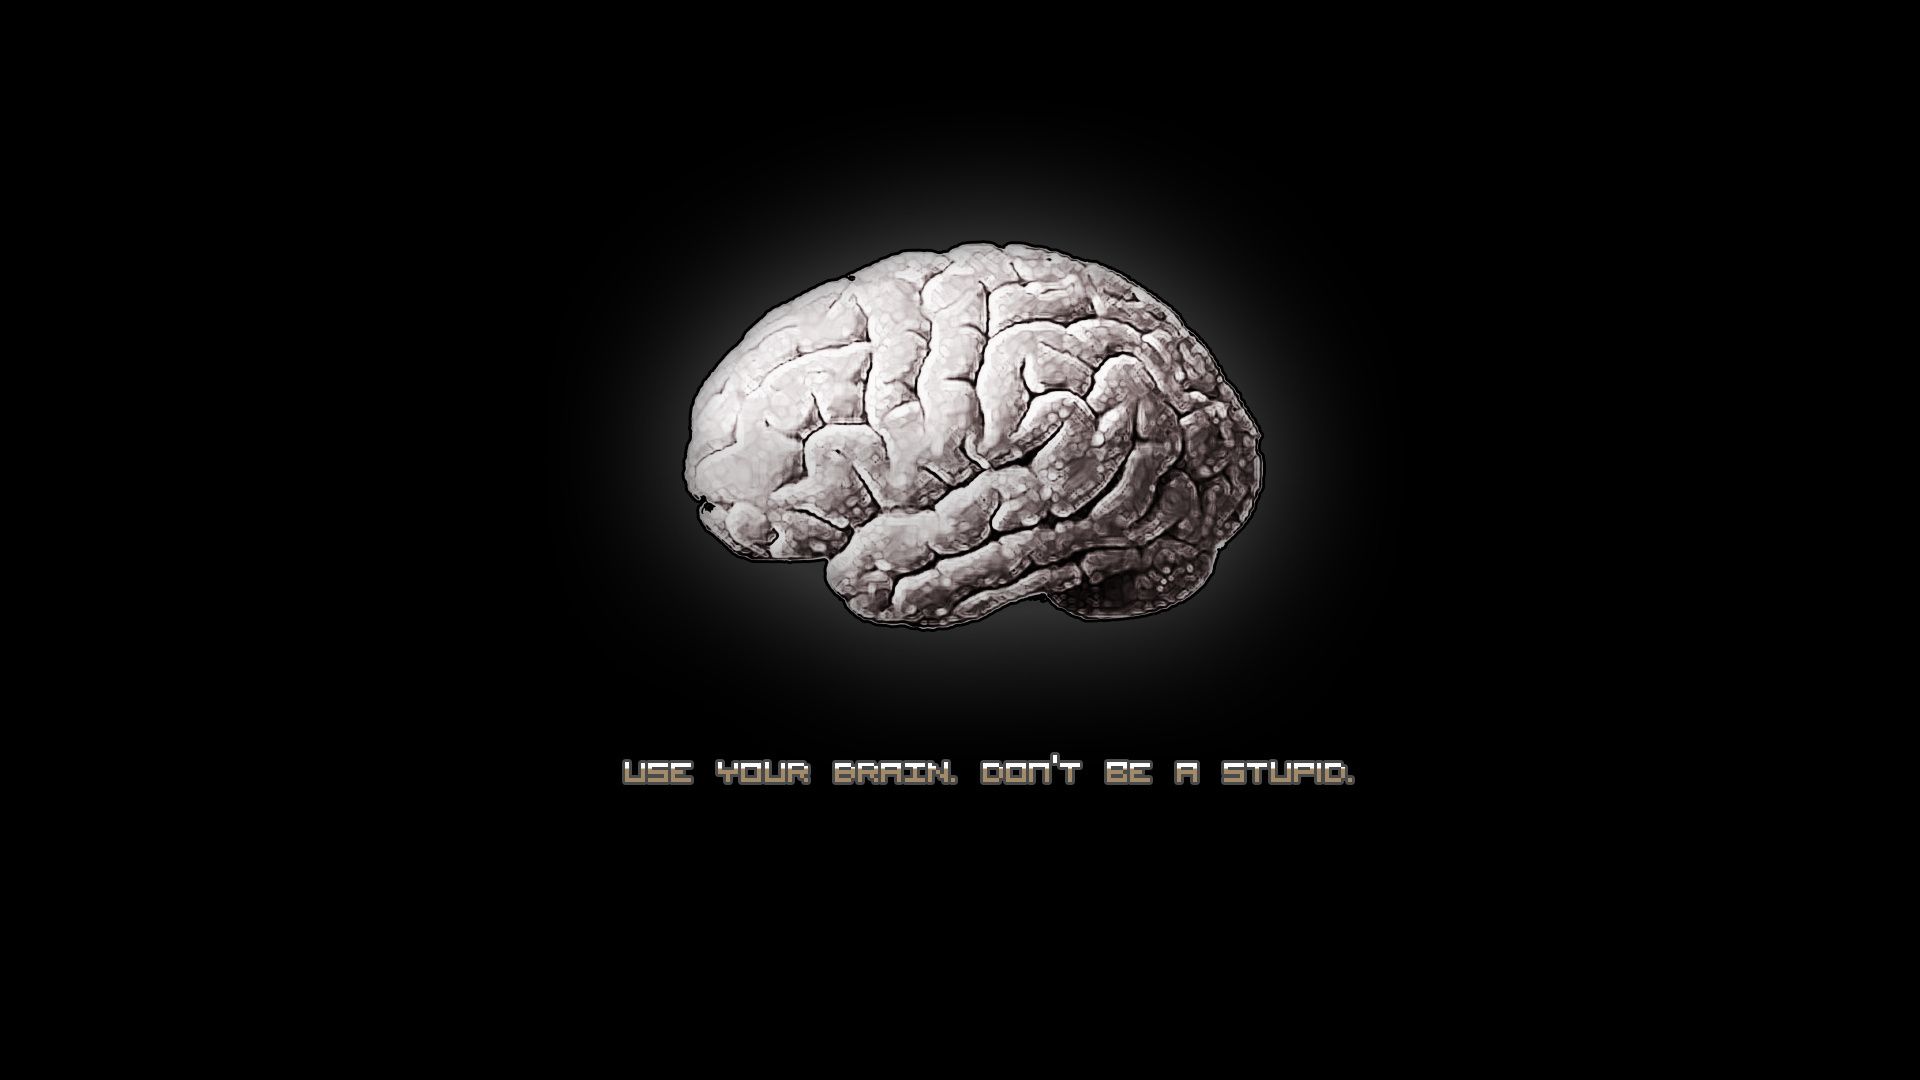 Use your brain wallpapers and images - wallpapers, pictures, photos